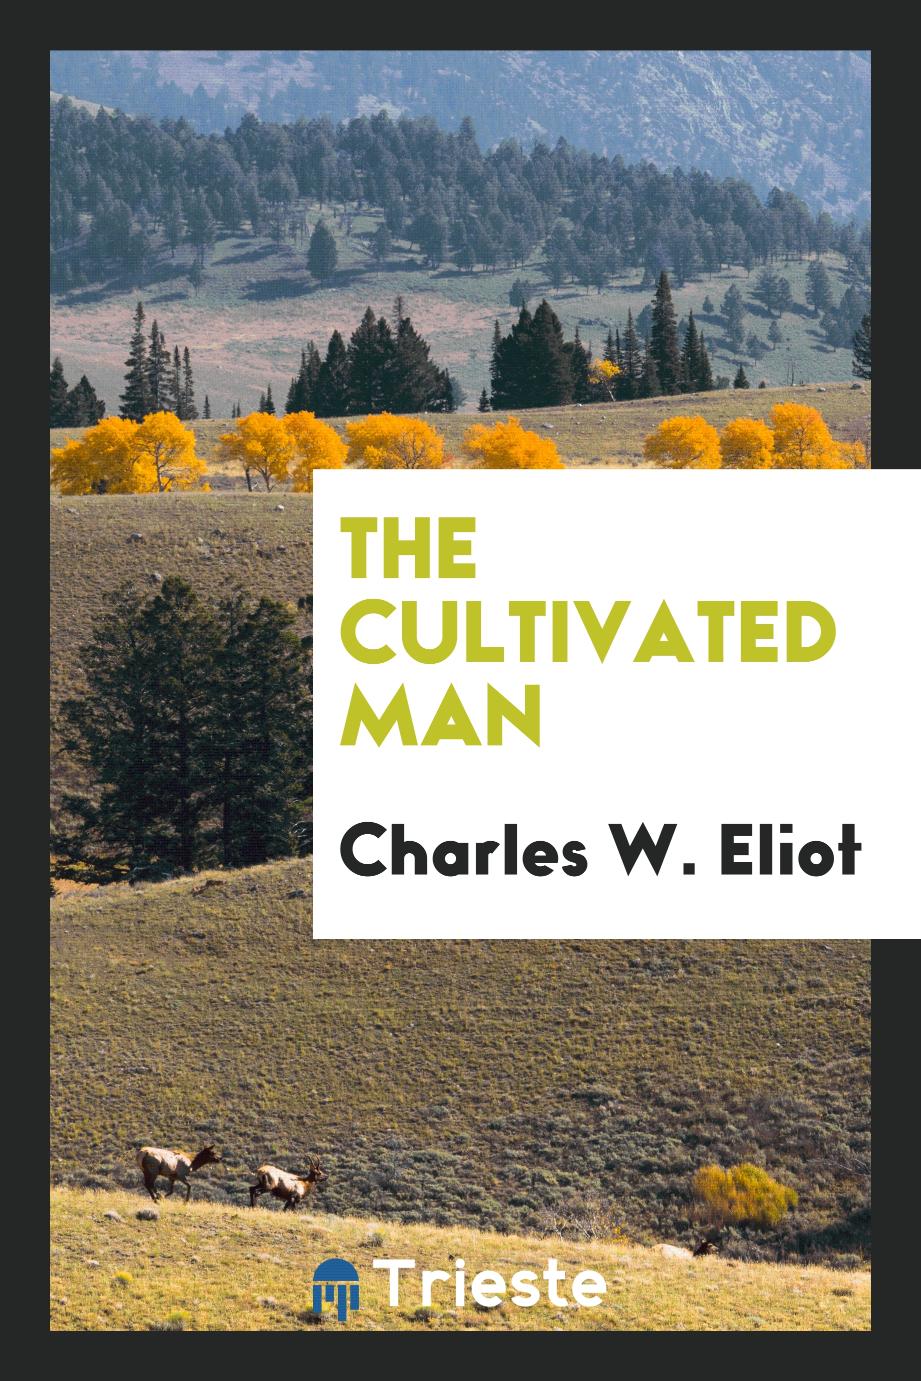 The Cultivated Man